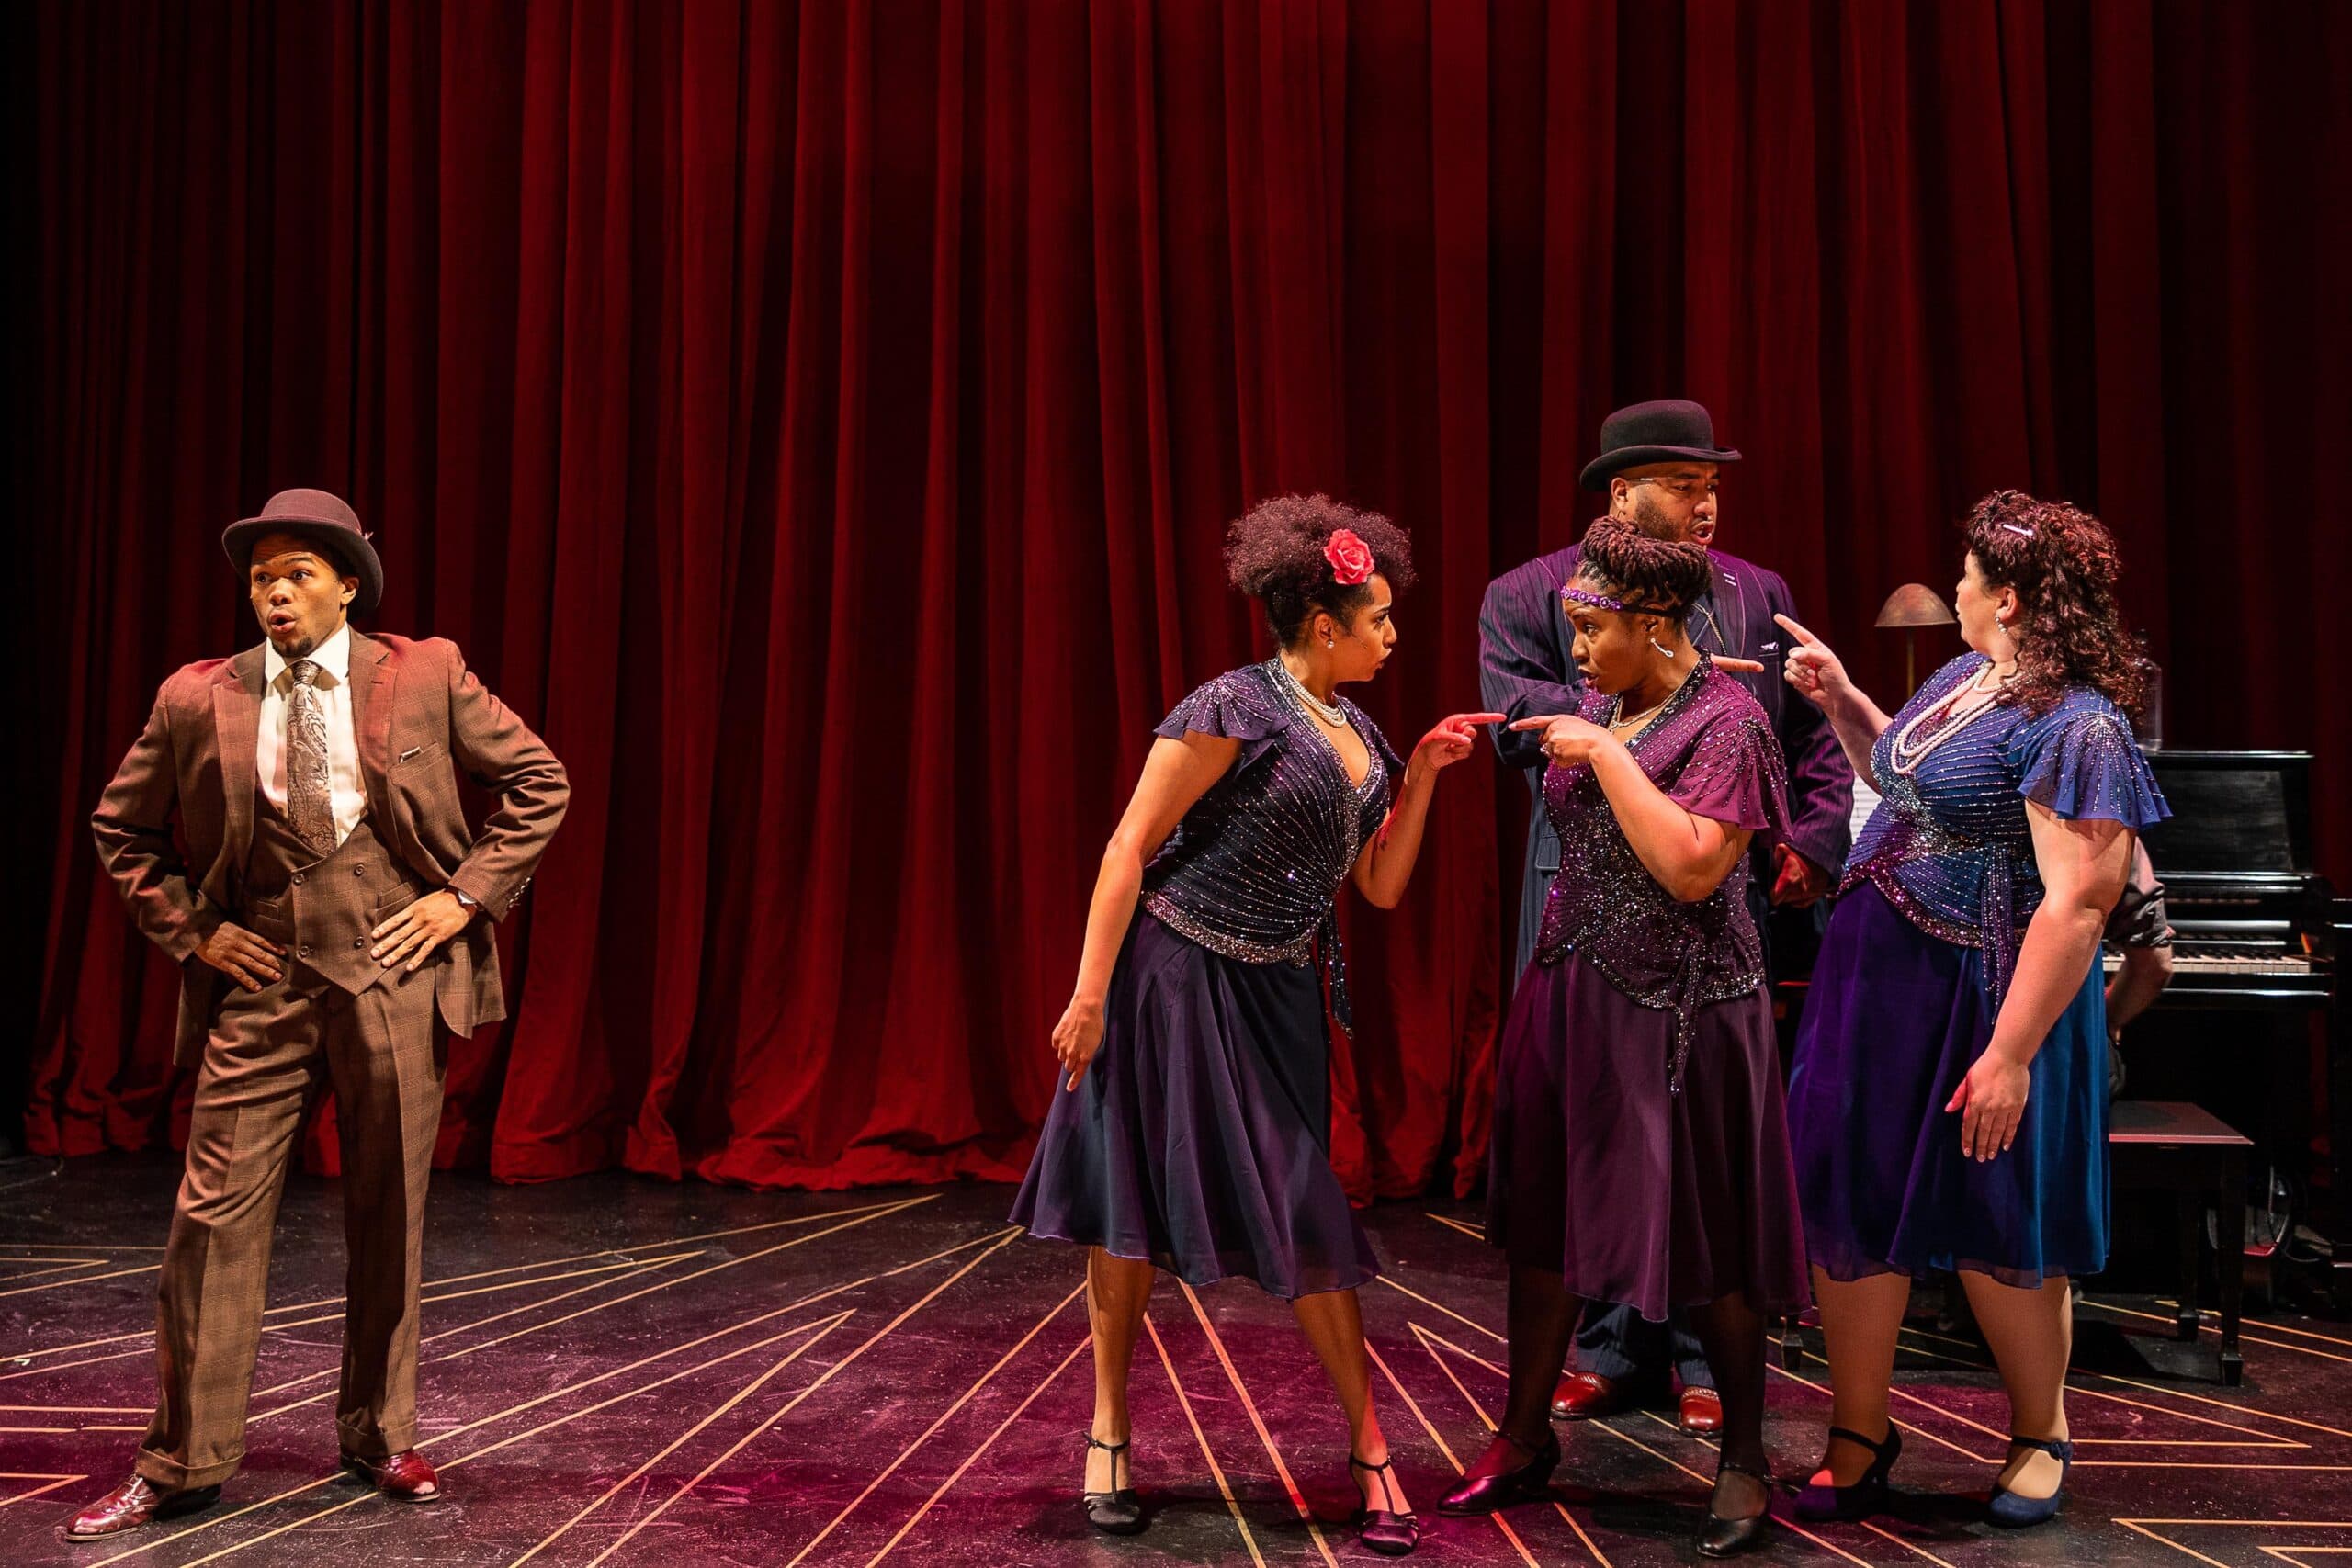 Left to right: Jackson Jirard, Christina Jones, Lovely Hoffman, Anthony Pires Jr. and Sheree Marcelle in "Ain't Misbehavin' - The Fats Waller Musical." (Courtesy Nile Scott Studios)